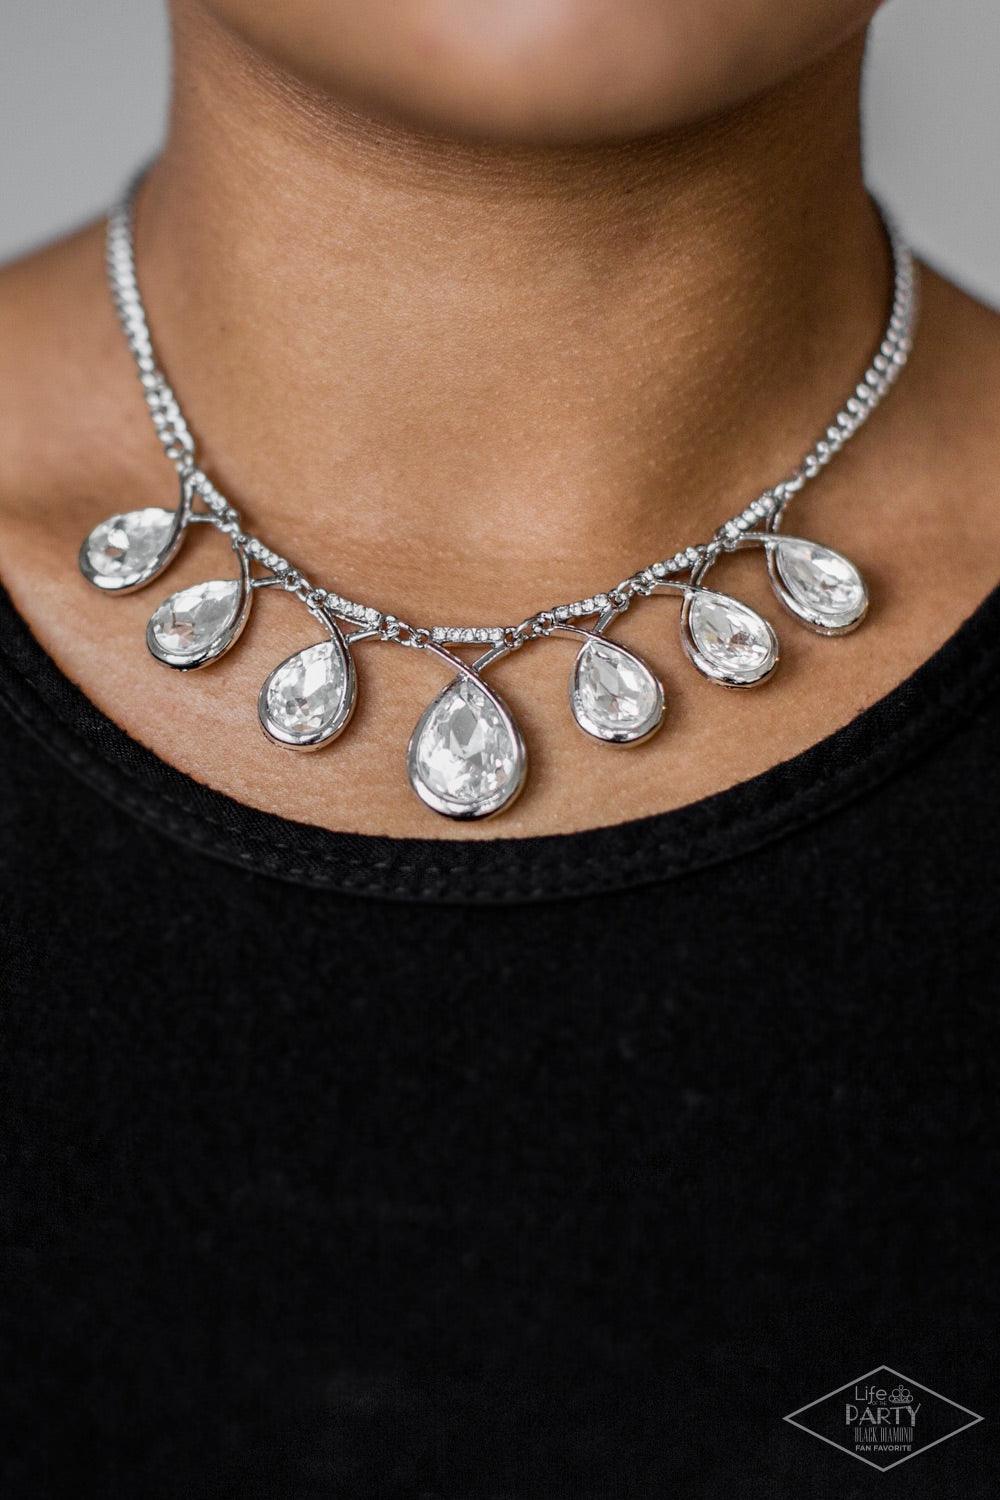 Paparazzi Accessories Love At FIERCE Sight - White Suspended by glittery links, large teardrop gems drip below the collar, creating a dramatic fringe. Swooping silver bars spin around the faceted teardrops, adding a shiny metallic finish to the fierce cen